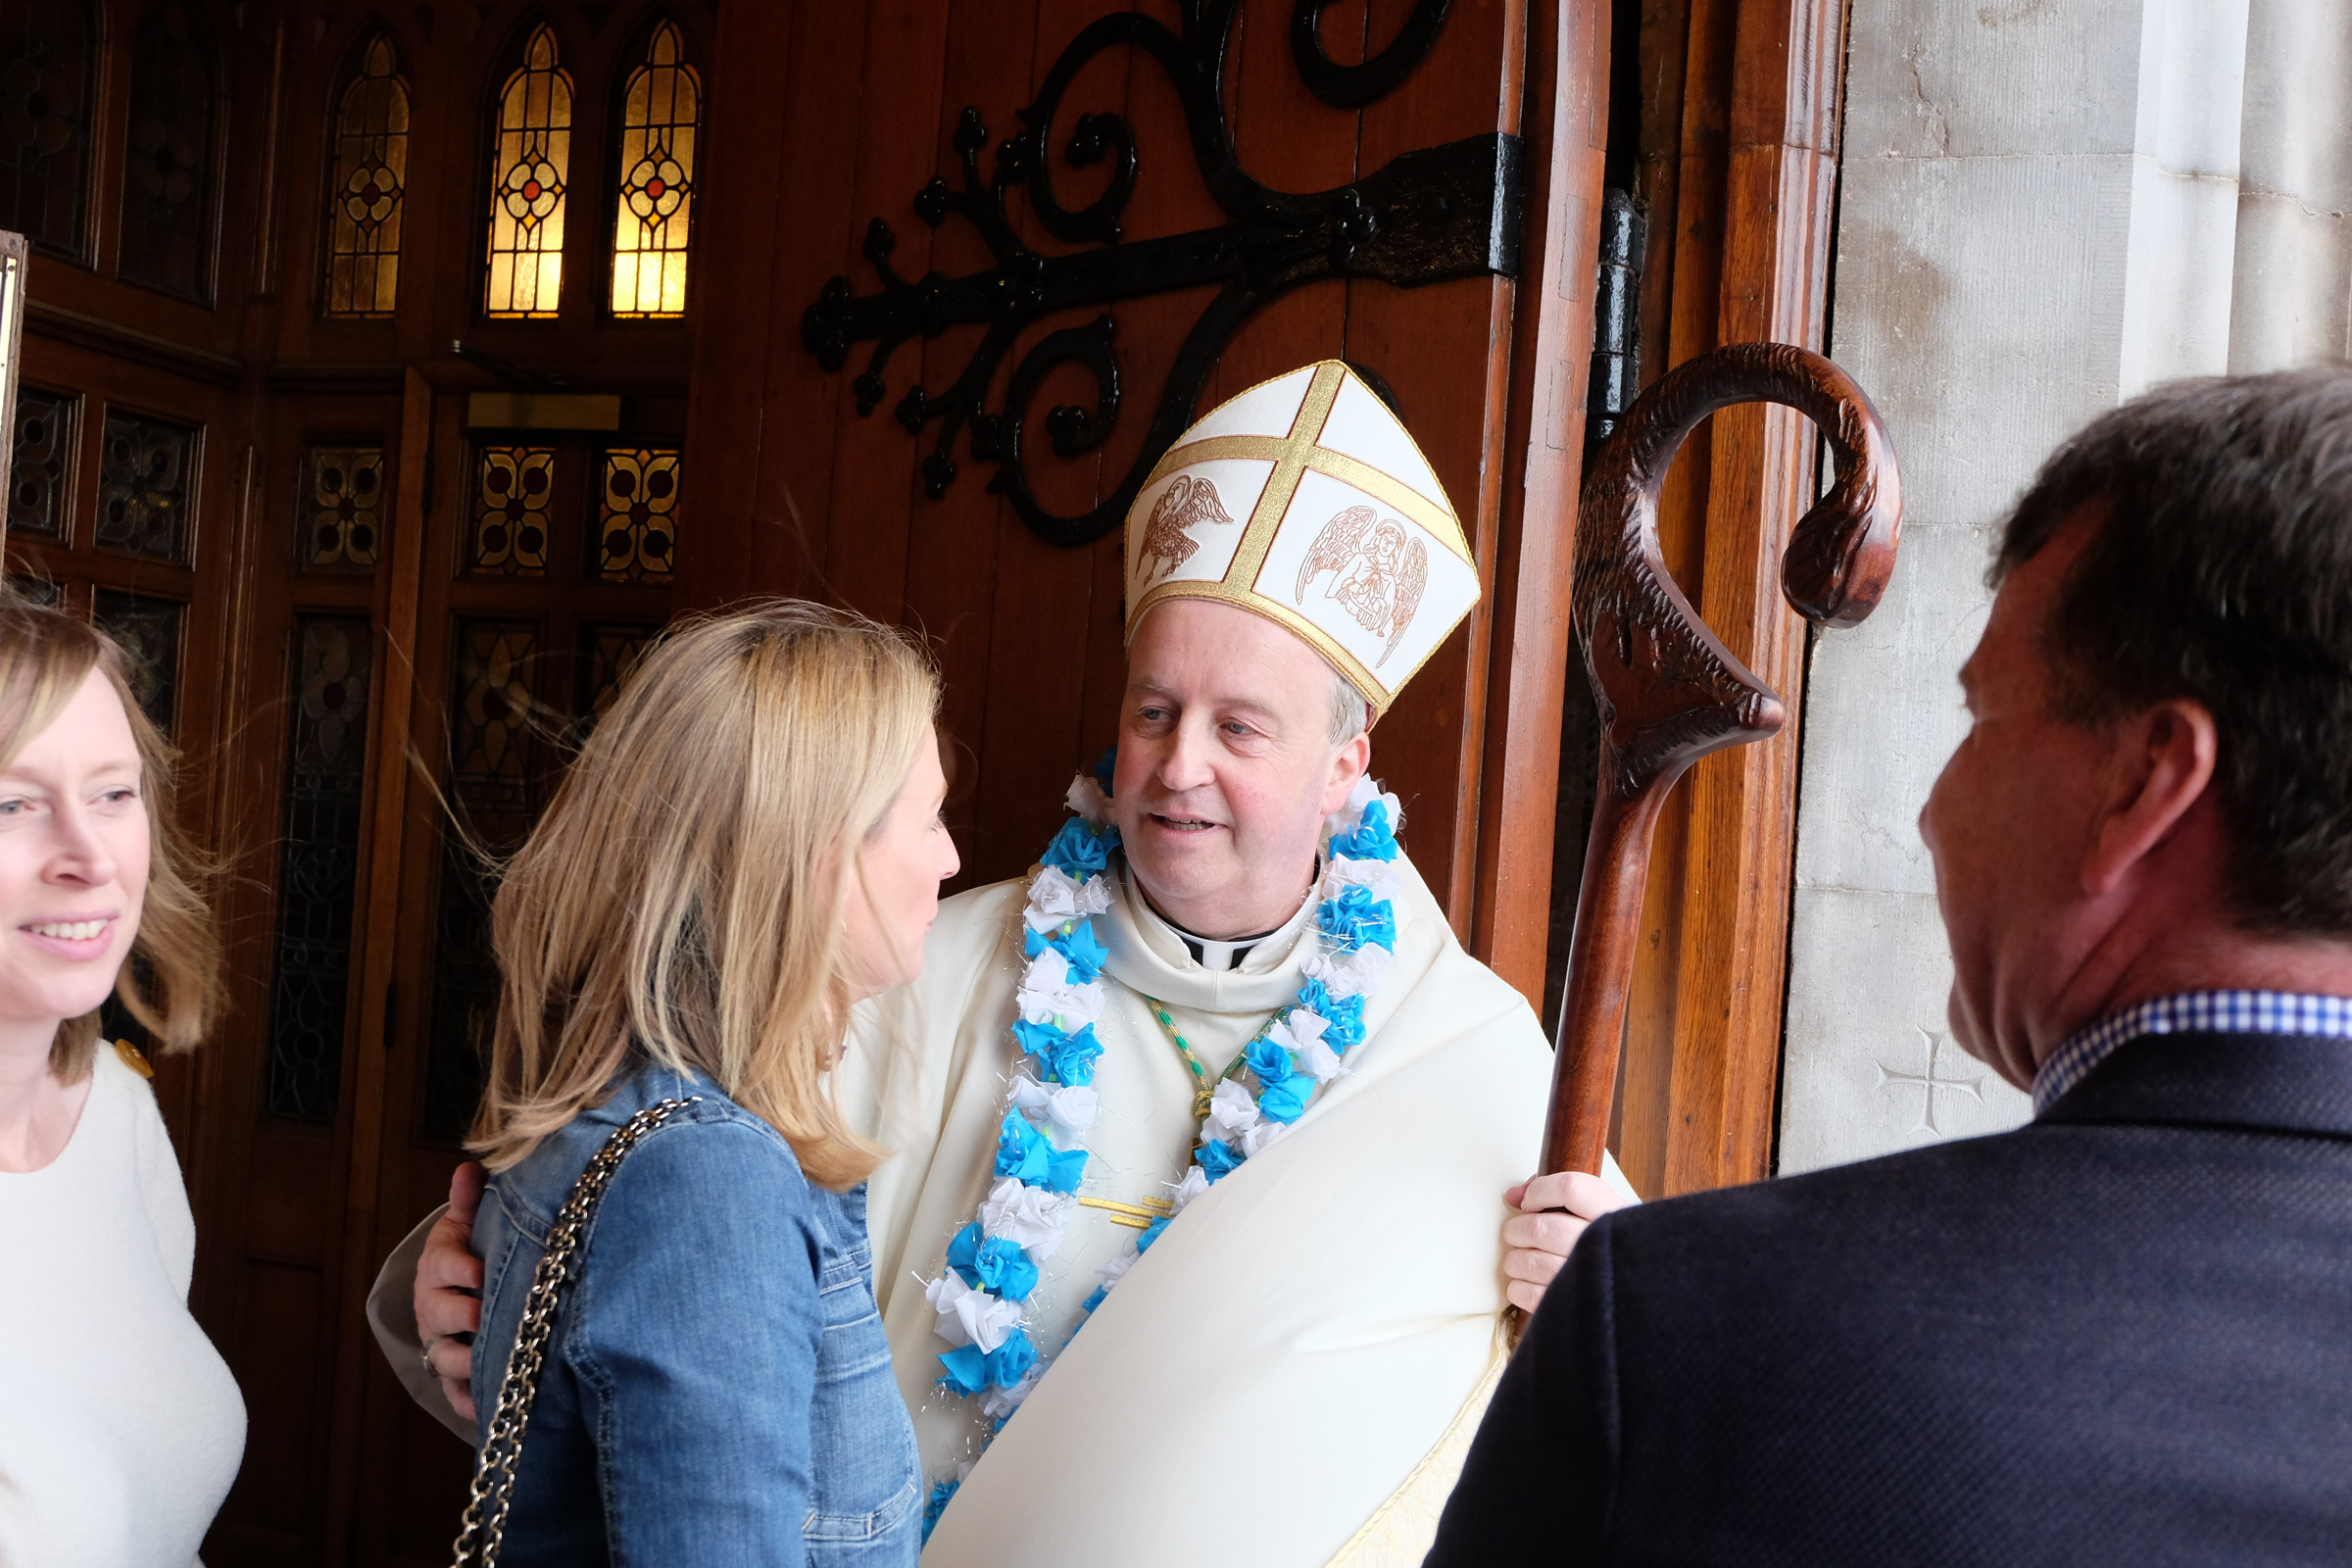 Ordination of Bishop Michael RouterSt Patrick's Cathedral, Armagh,  21 July 2019Credit: LiamMcArdle.com